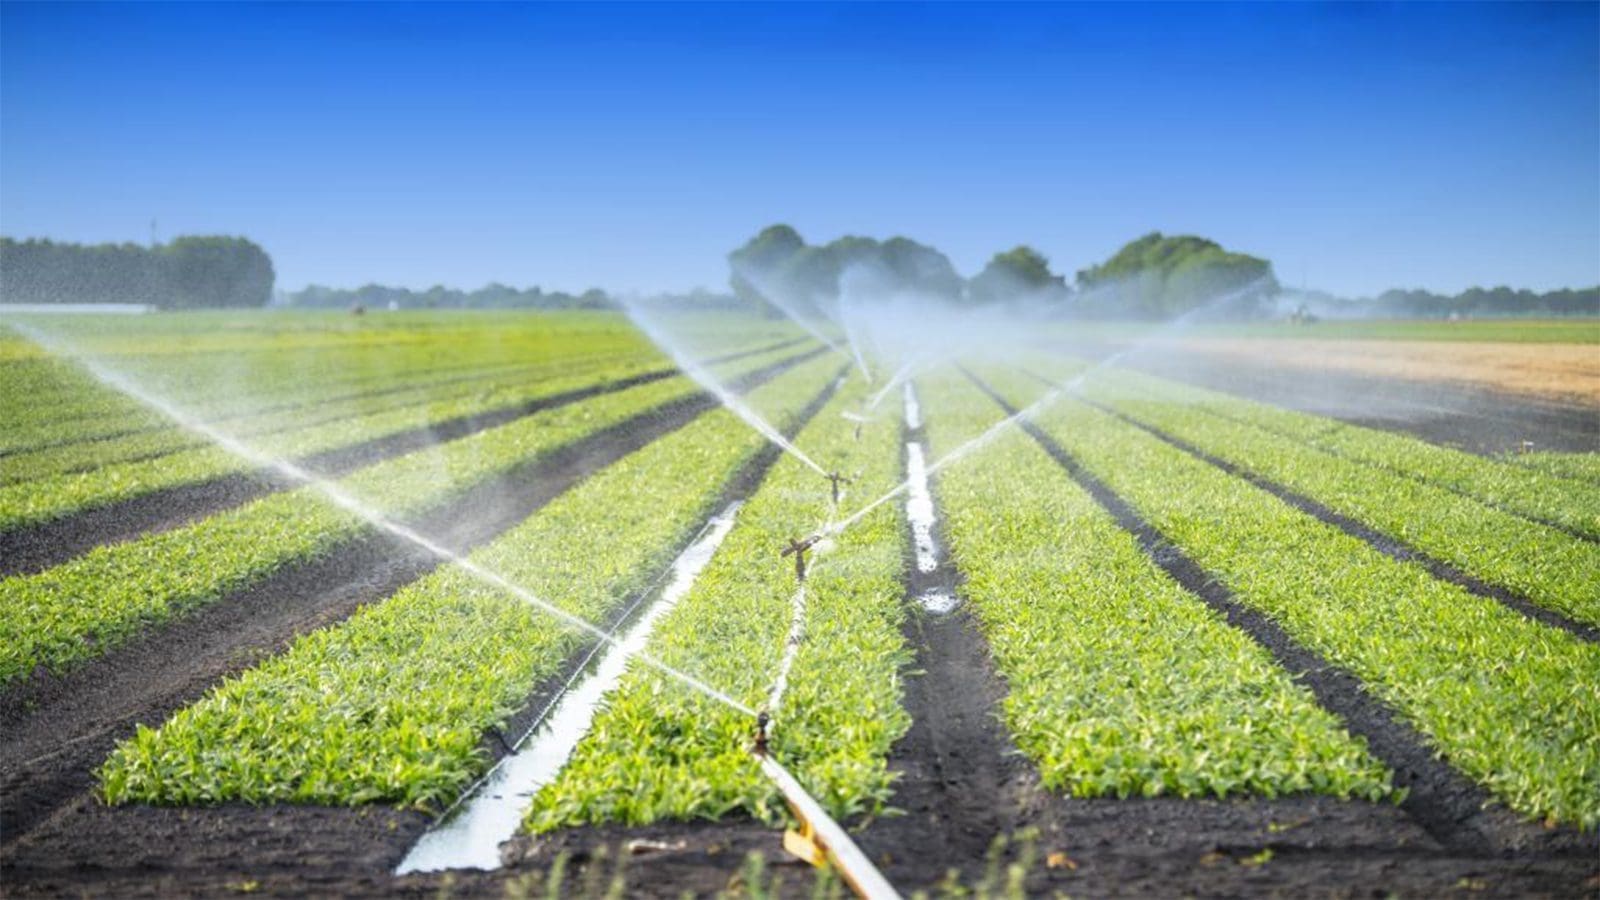 FDA reminds stakeholders of looming deadline for complying with agricultural water requirements